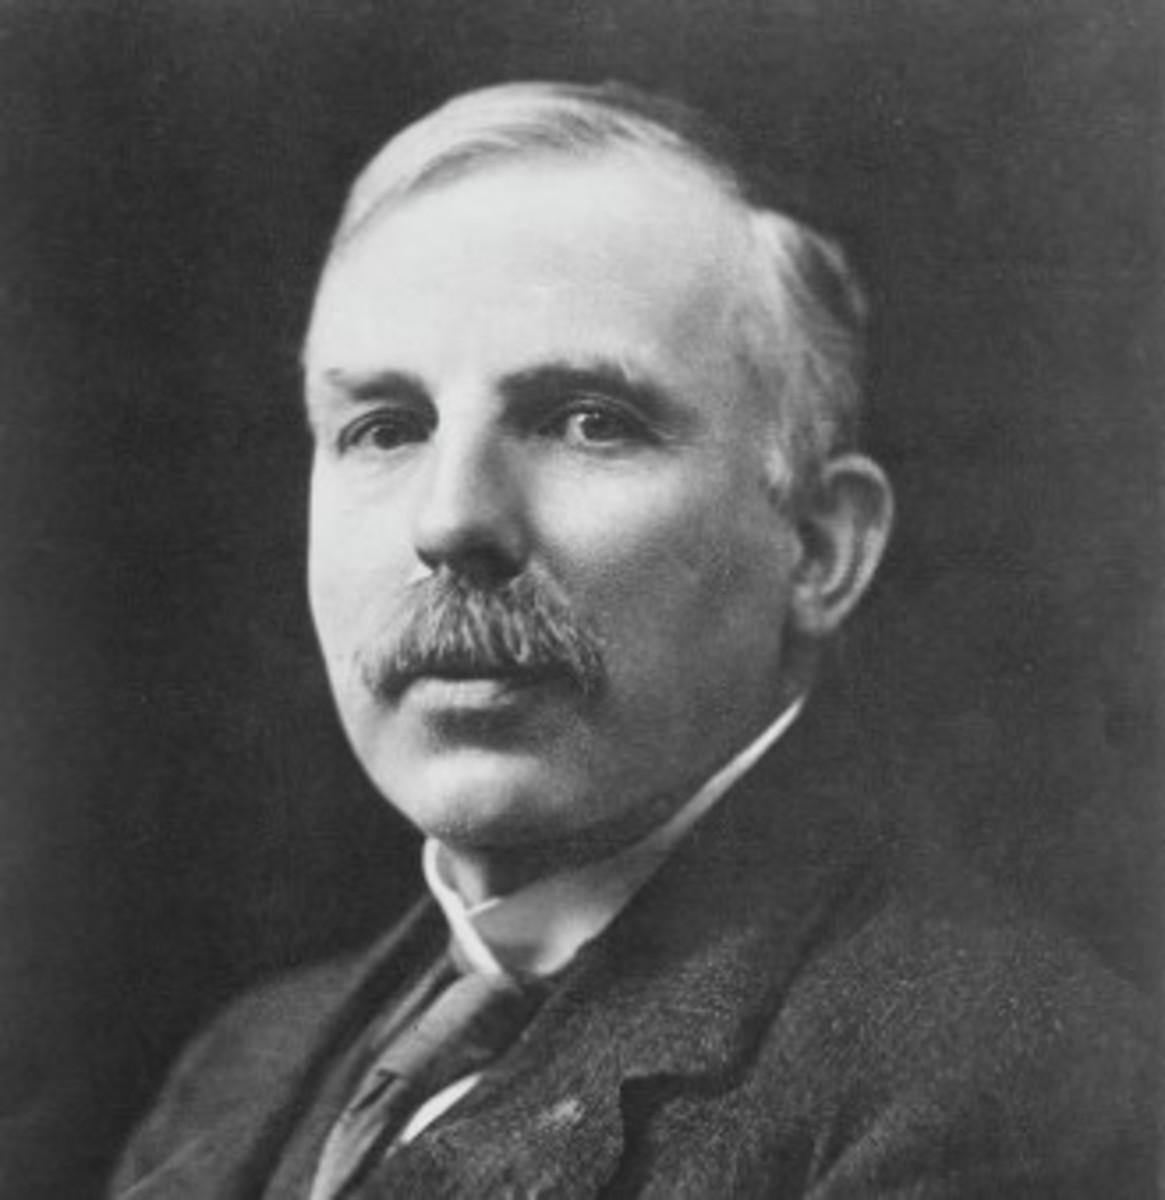 Ernest Rutherford: The Proton Scientist